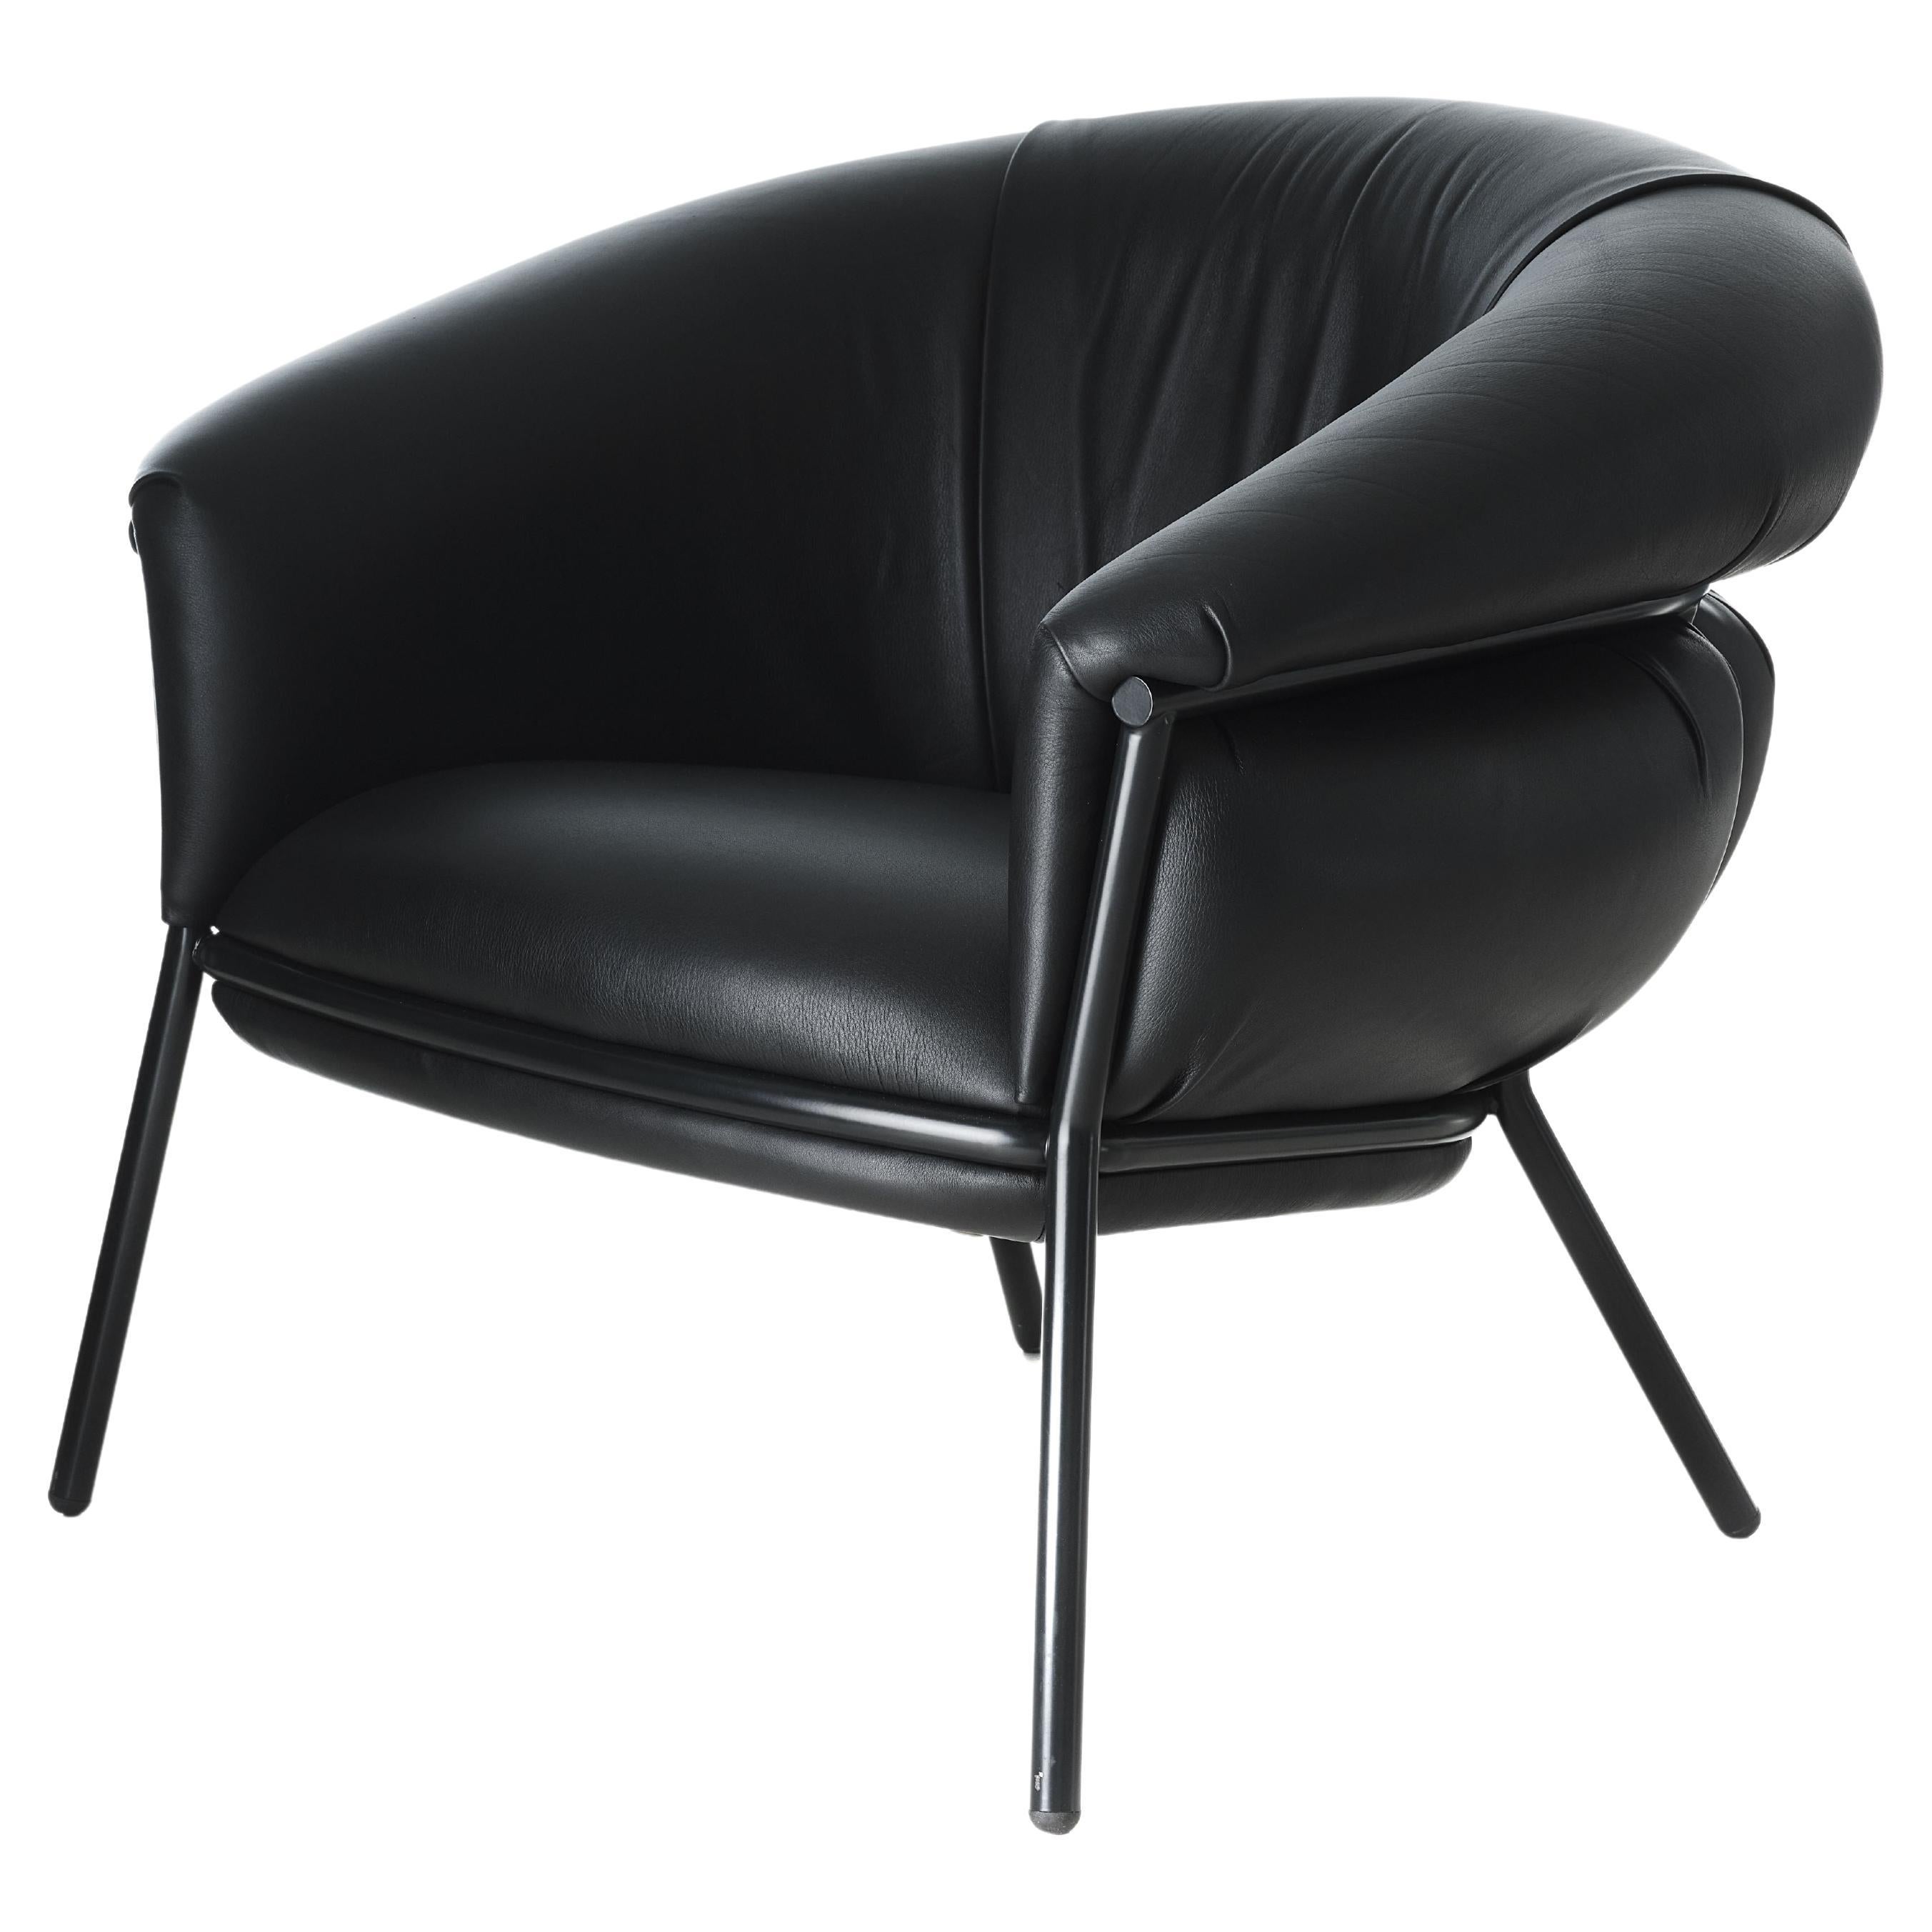 Grasso Armchair by Stephen Burks black padded leather upholstery black structure